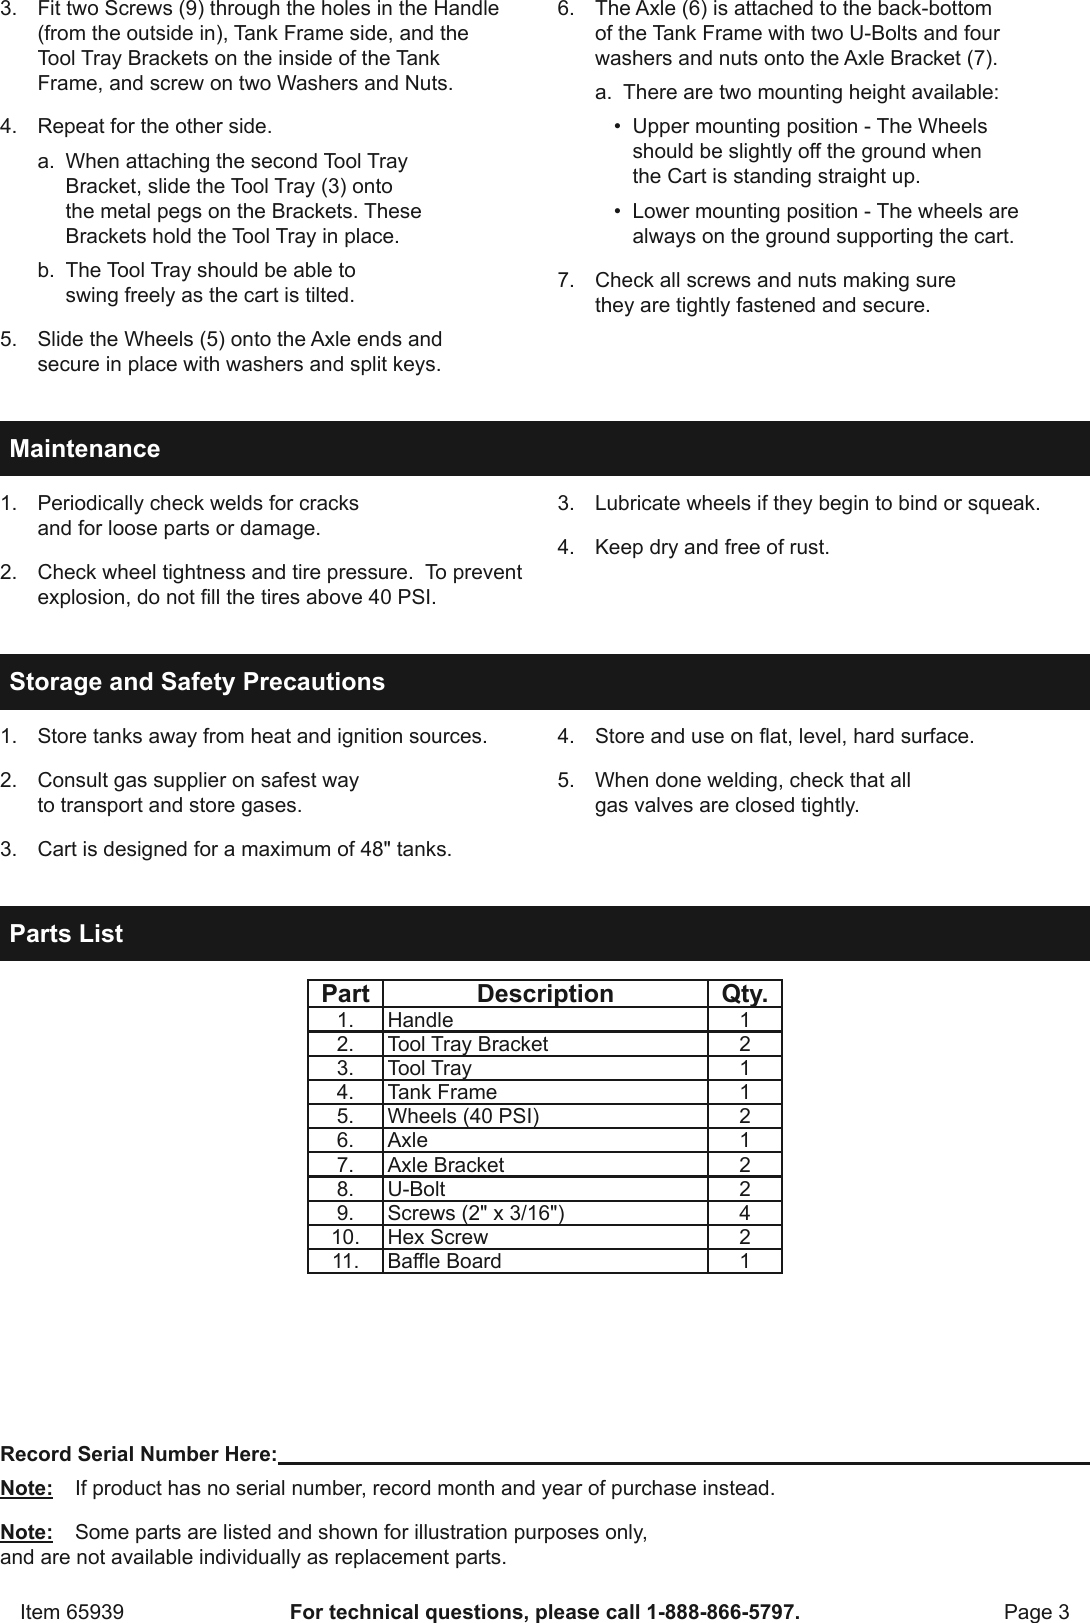 Page 3 of 4 - Manual For The 65939 Welding Cart - Red